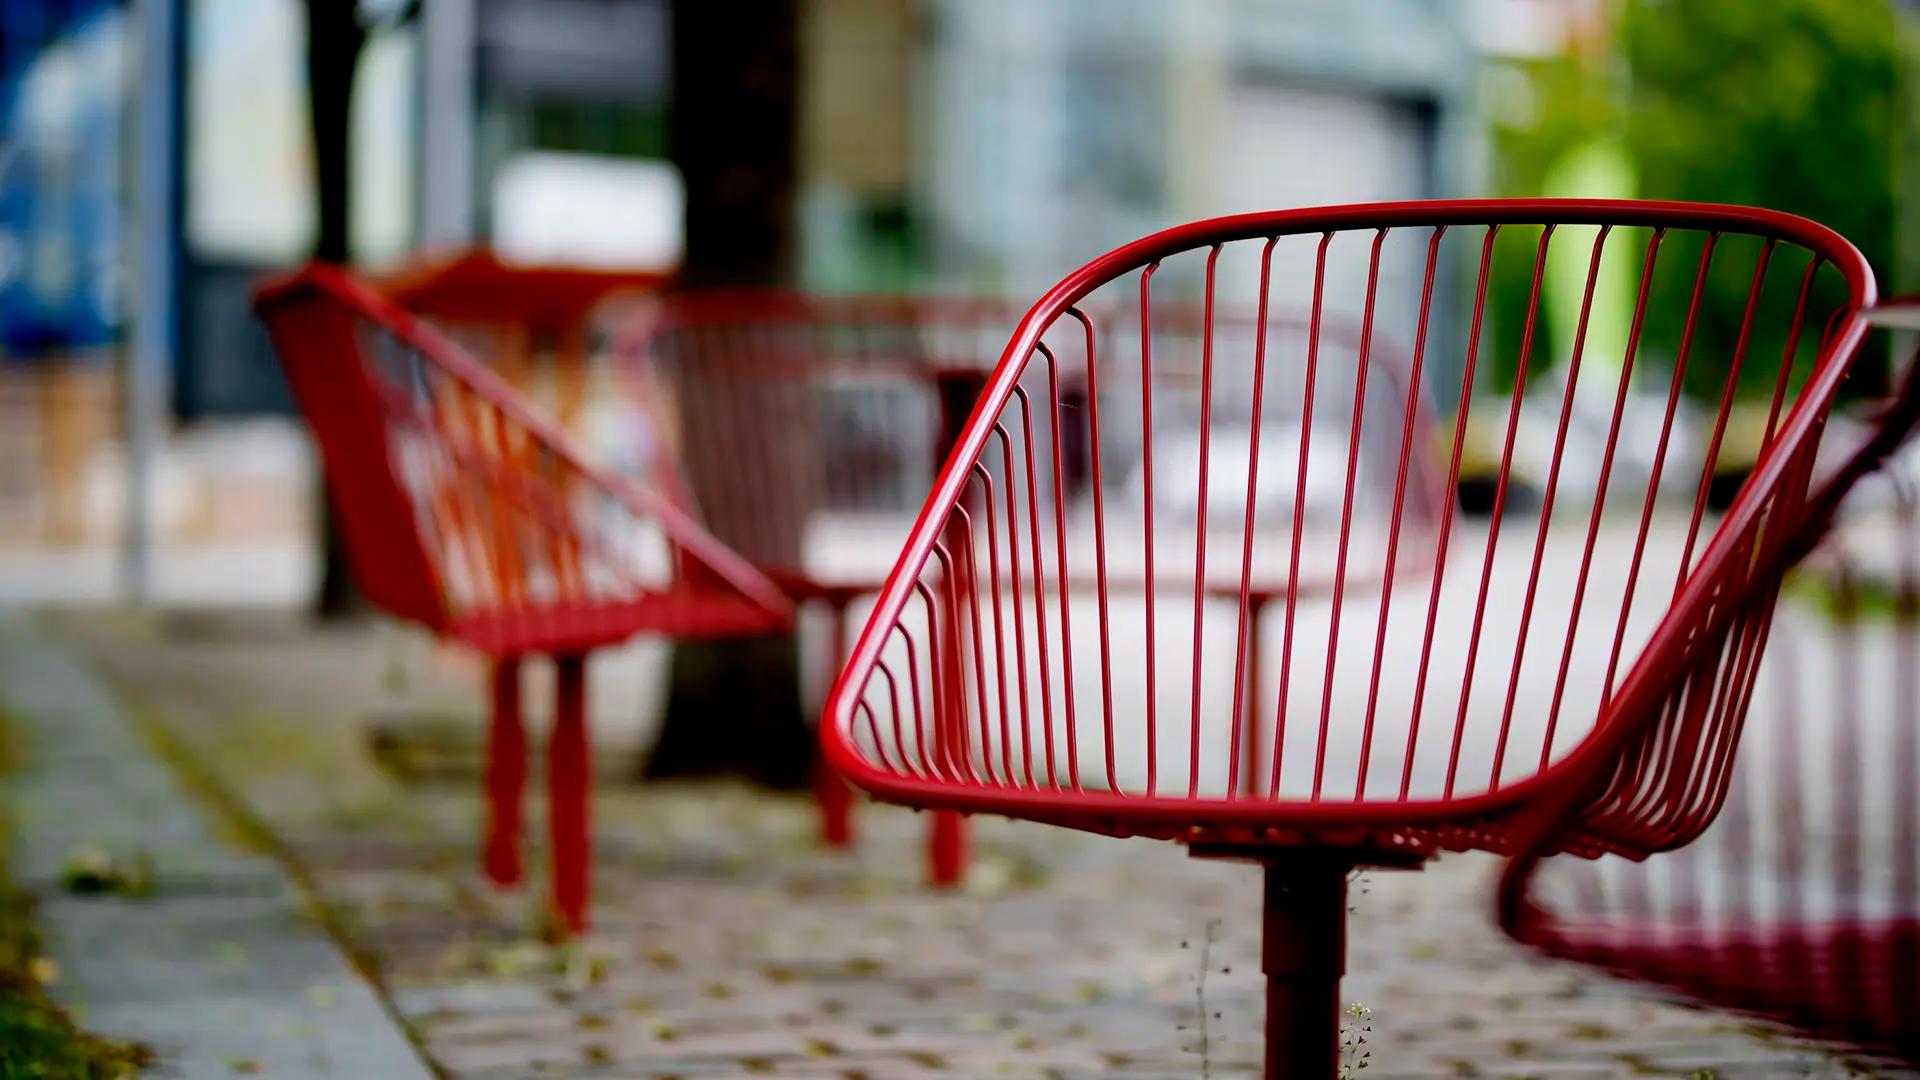 Detail image with red chairs outdoors